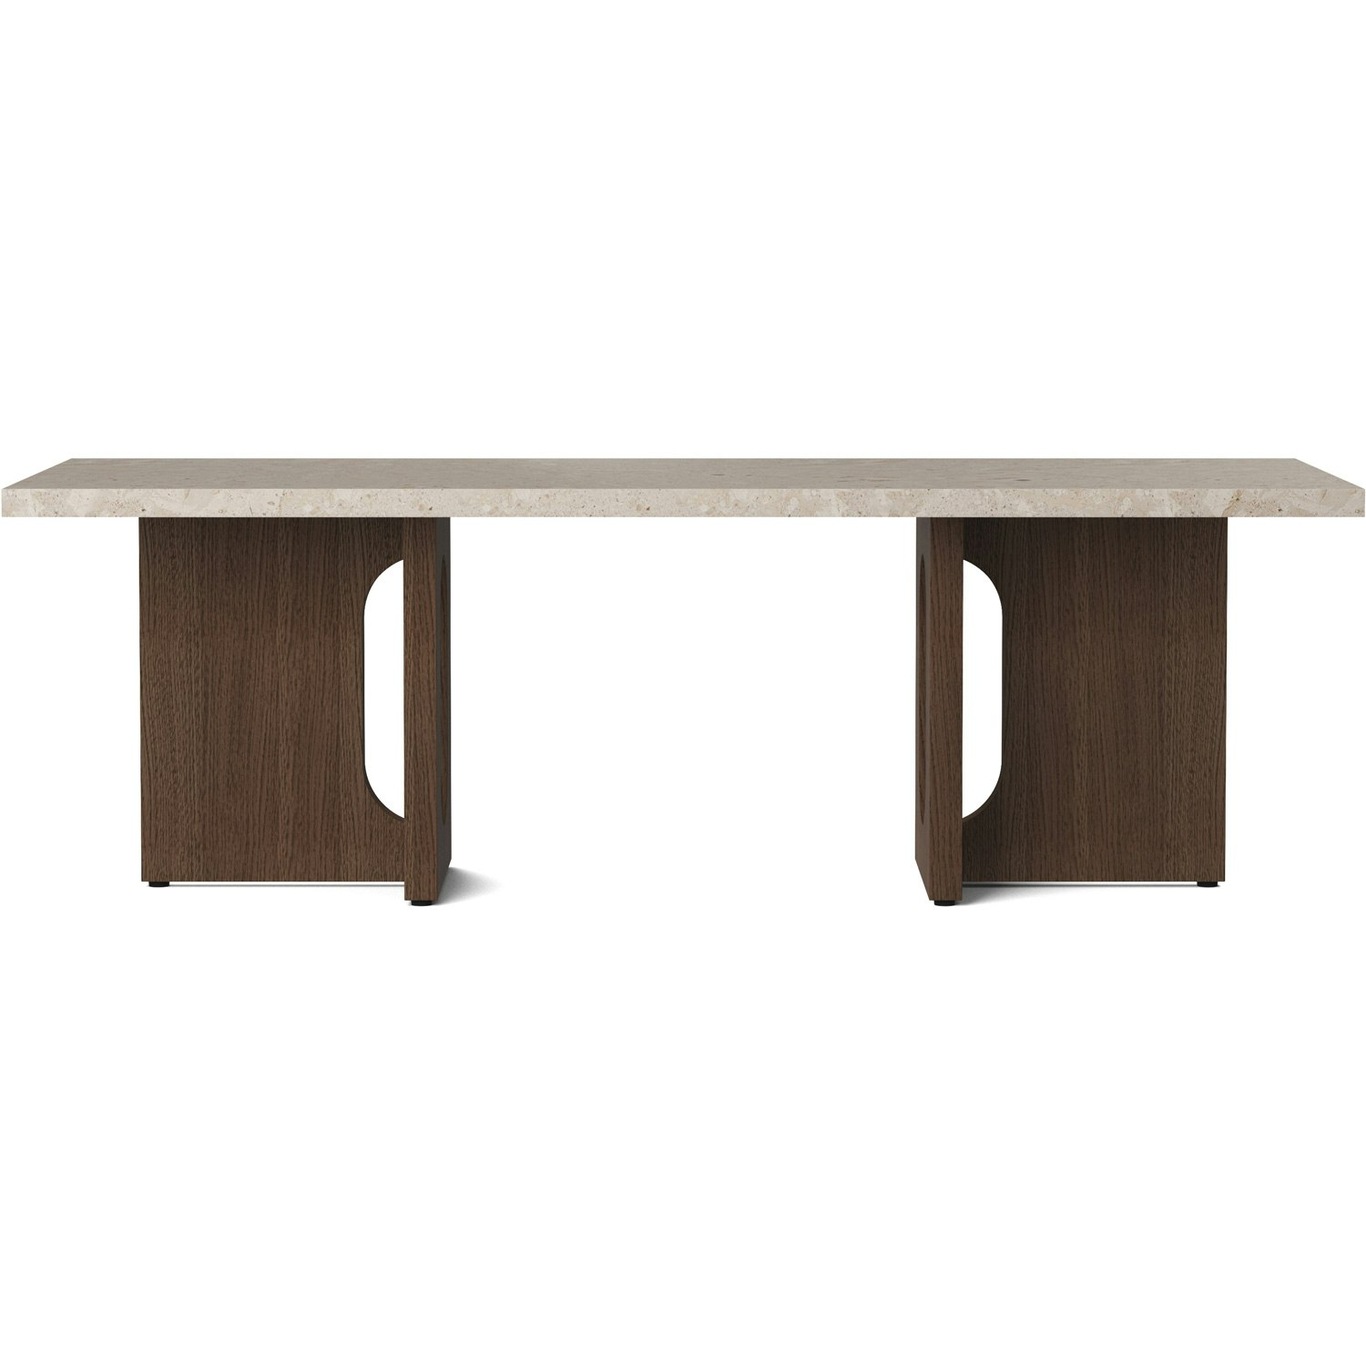 Androgyne Coffee Table, Dark Stained Oak / Sand